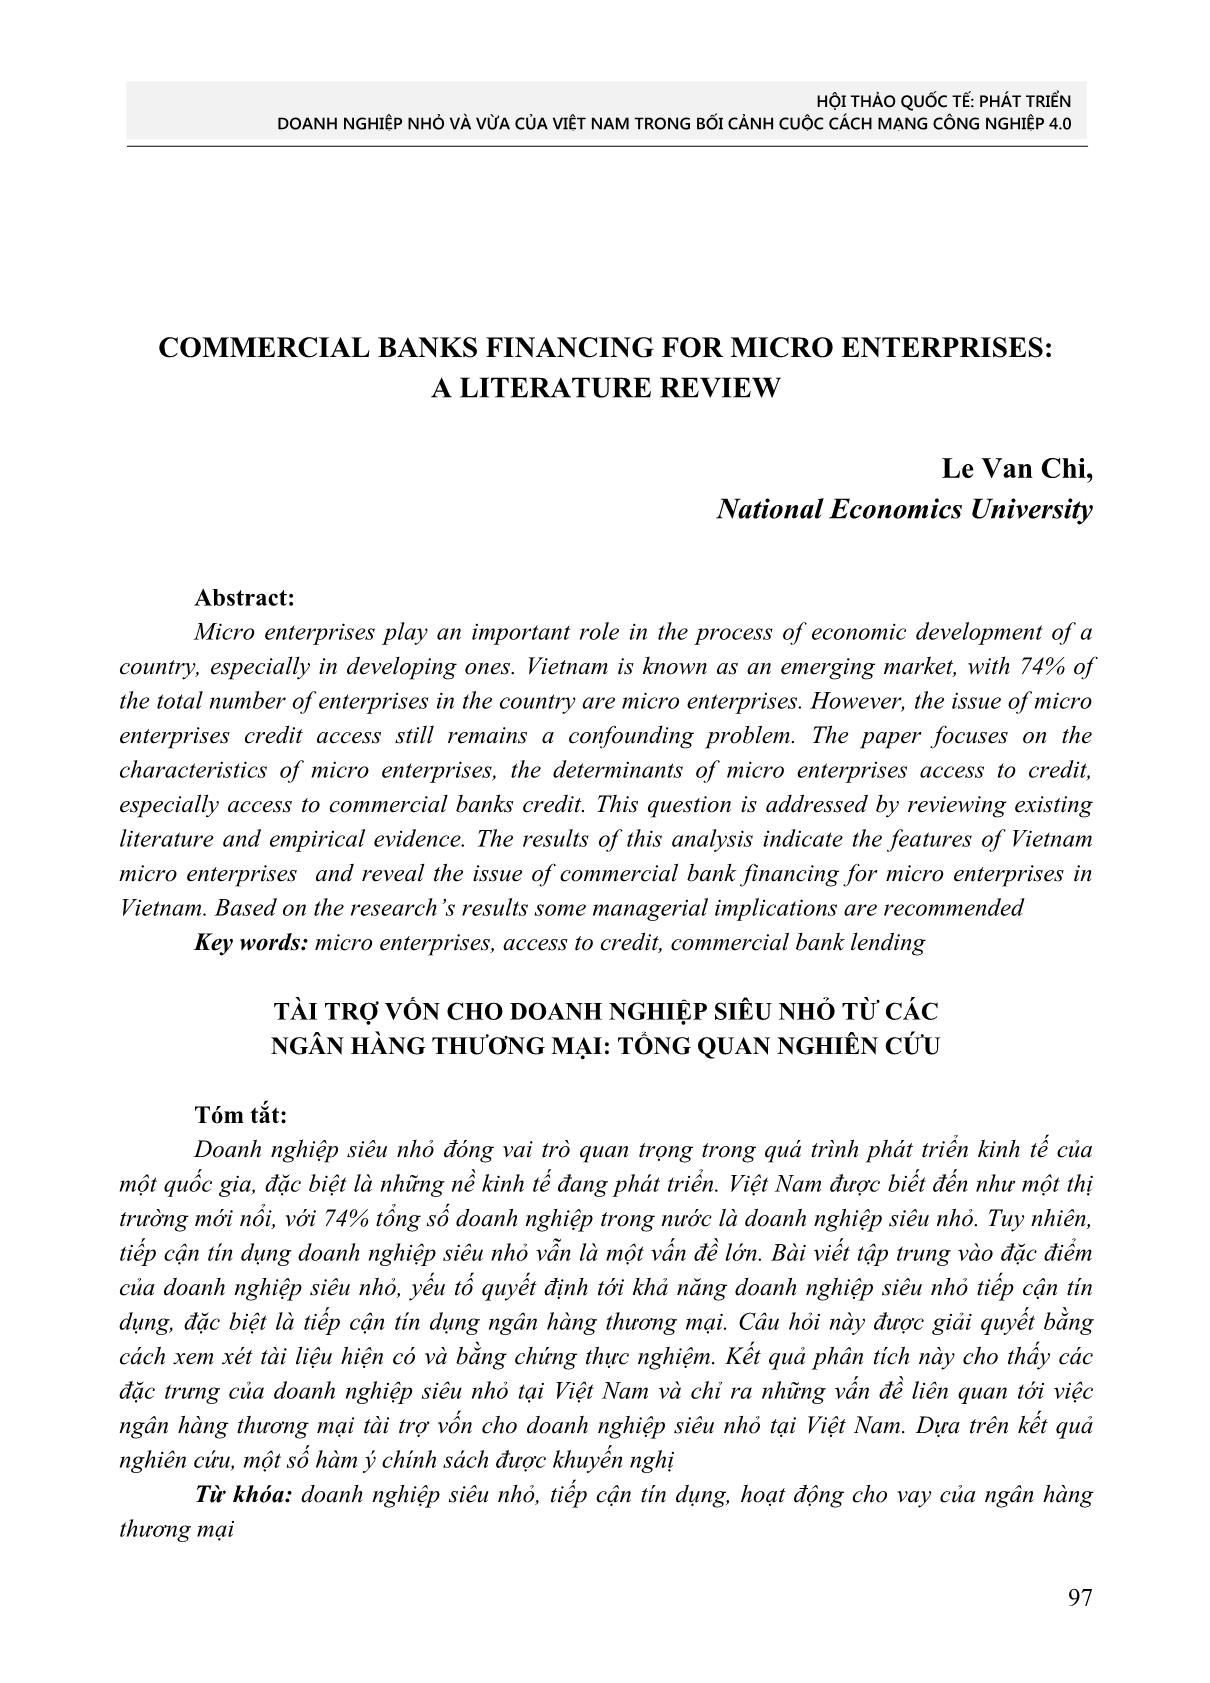 Commercial banks financing for micro enterprises: A literature review trang 1